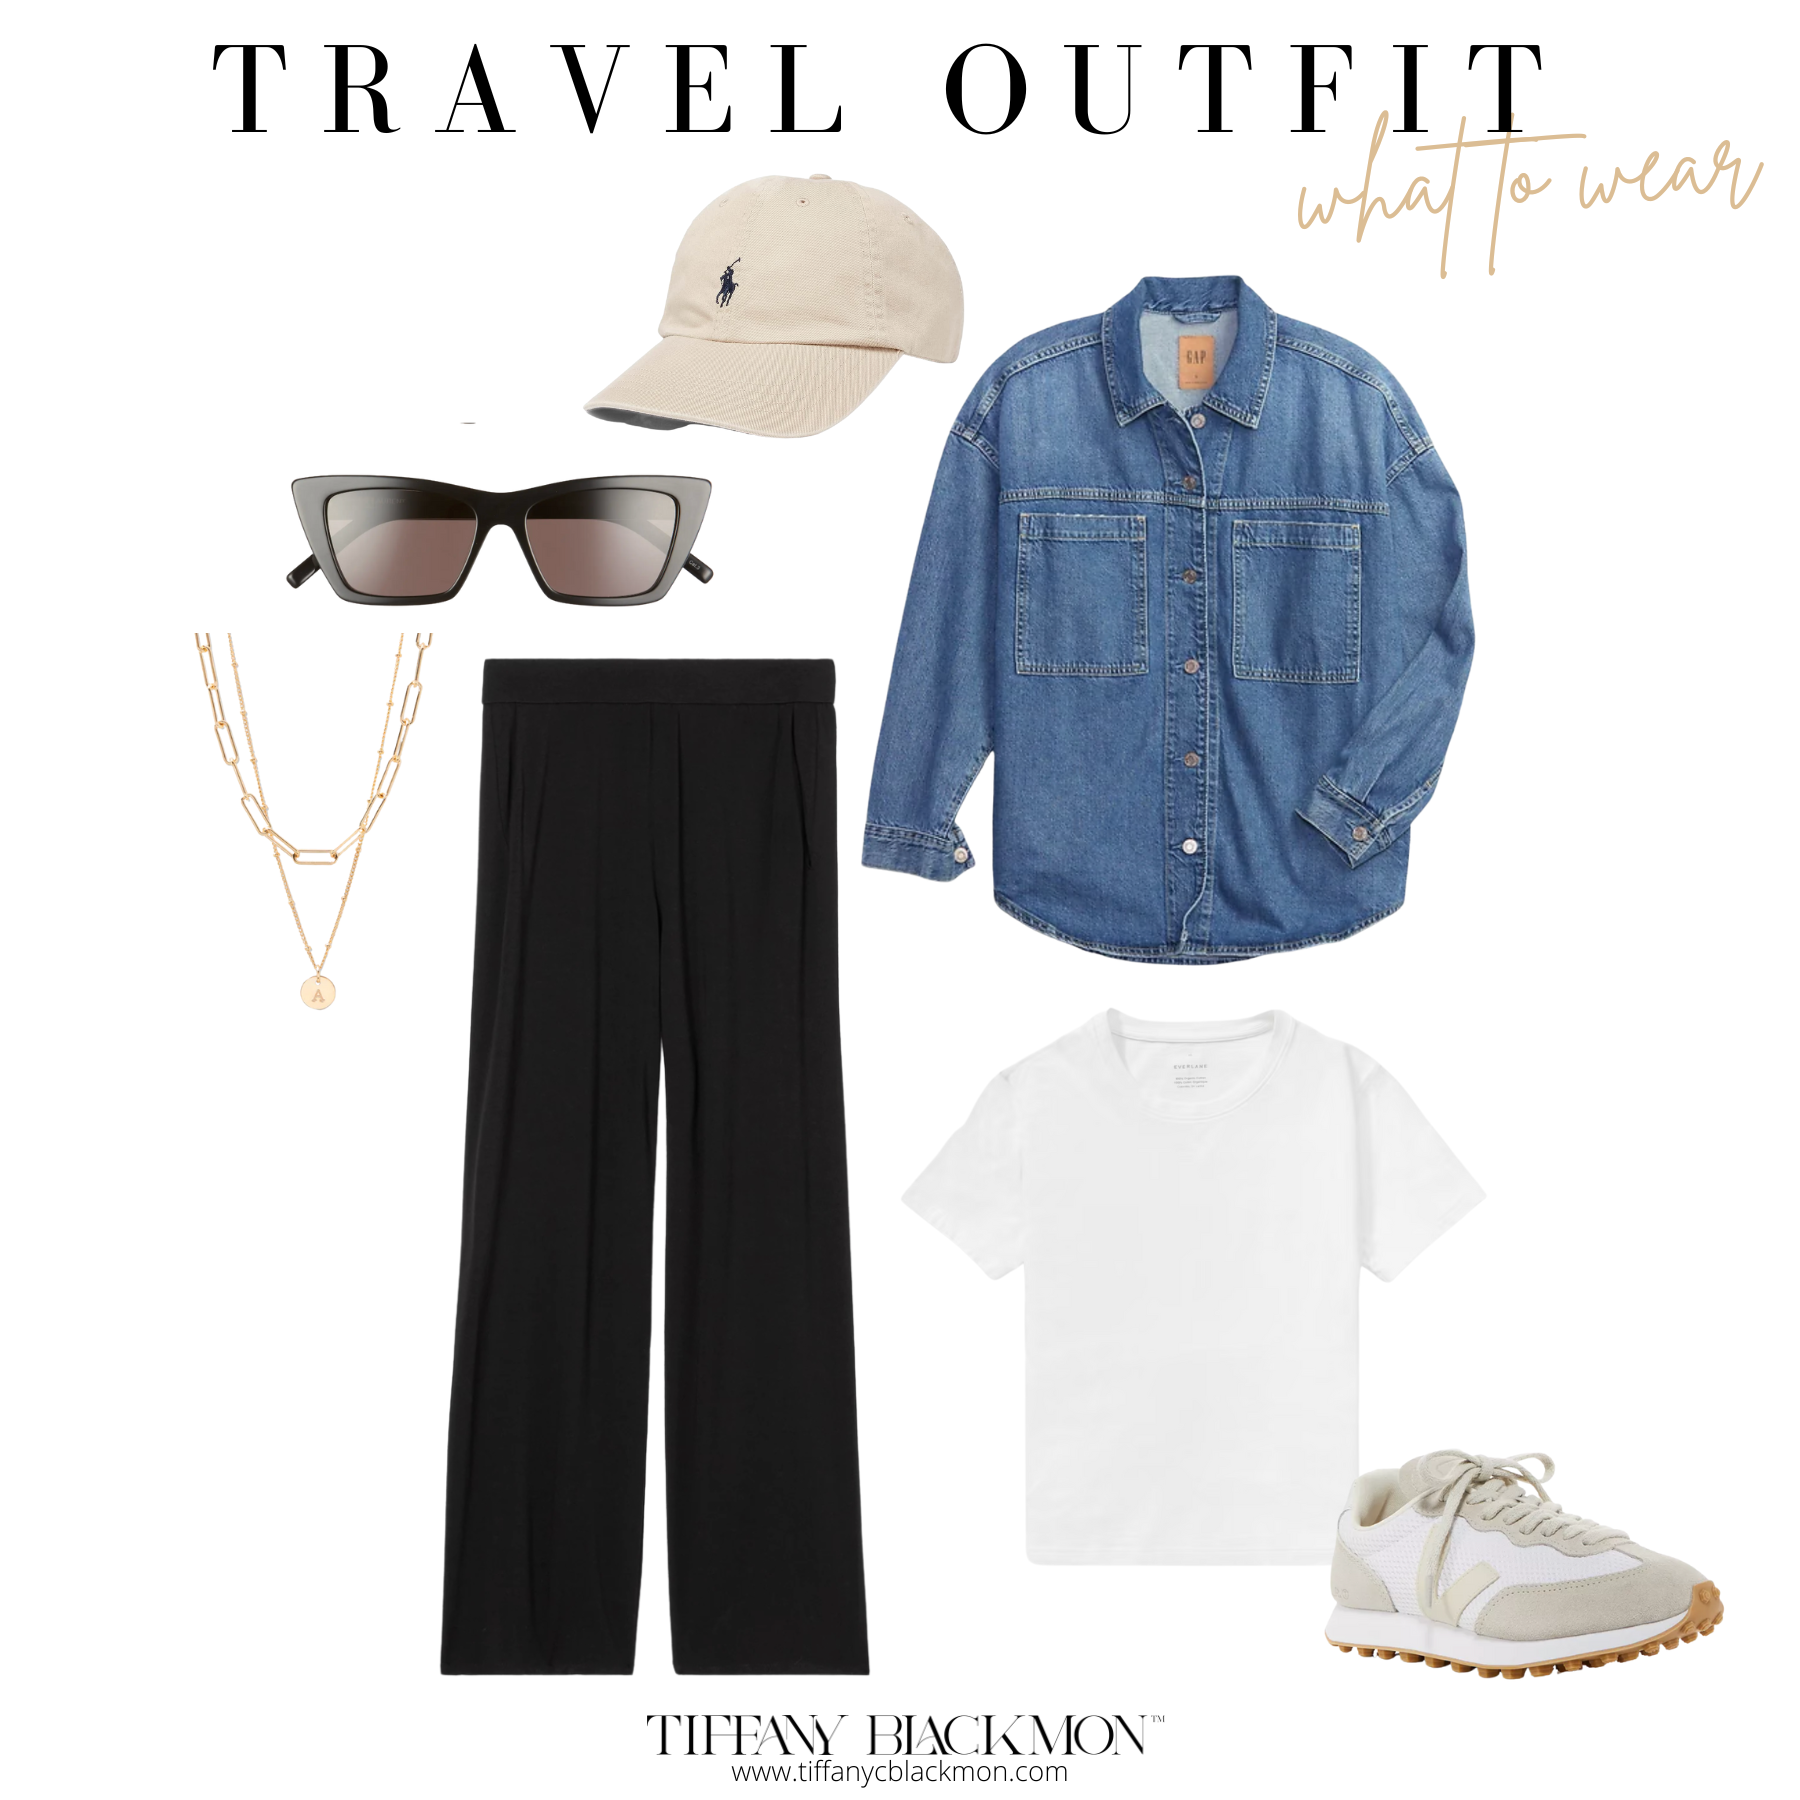 What to Wear: Travel Outfits
#travel #travellooks #airportoutfit #comfy #comfortableoutfits #casualoutfits #springfashion #springoutfits #athleisure #traveling 